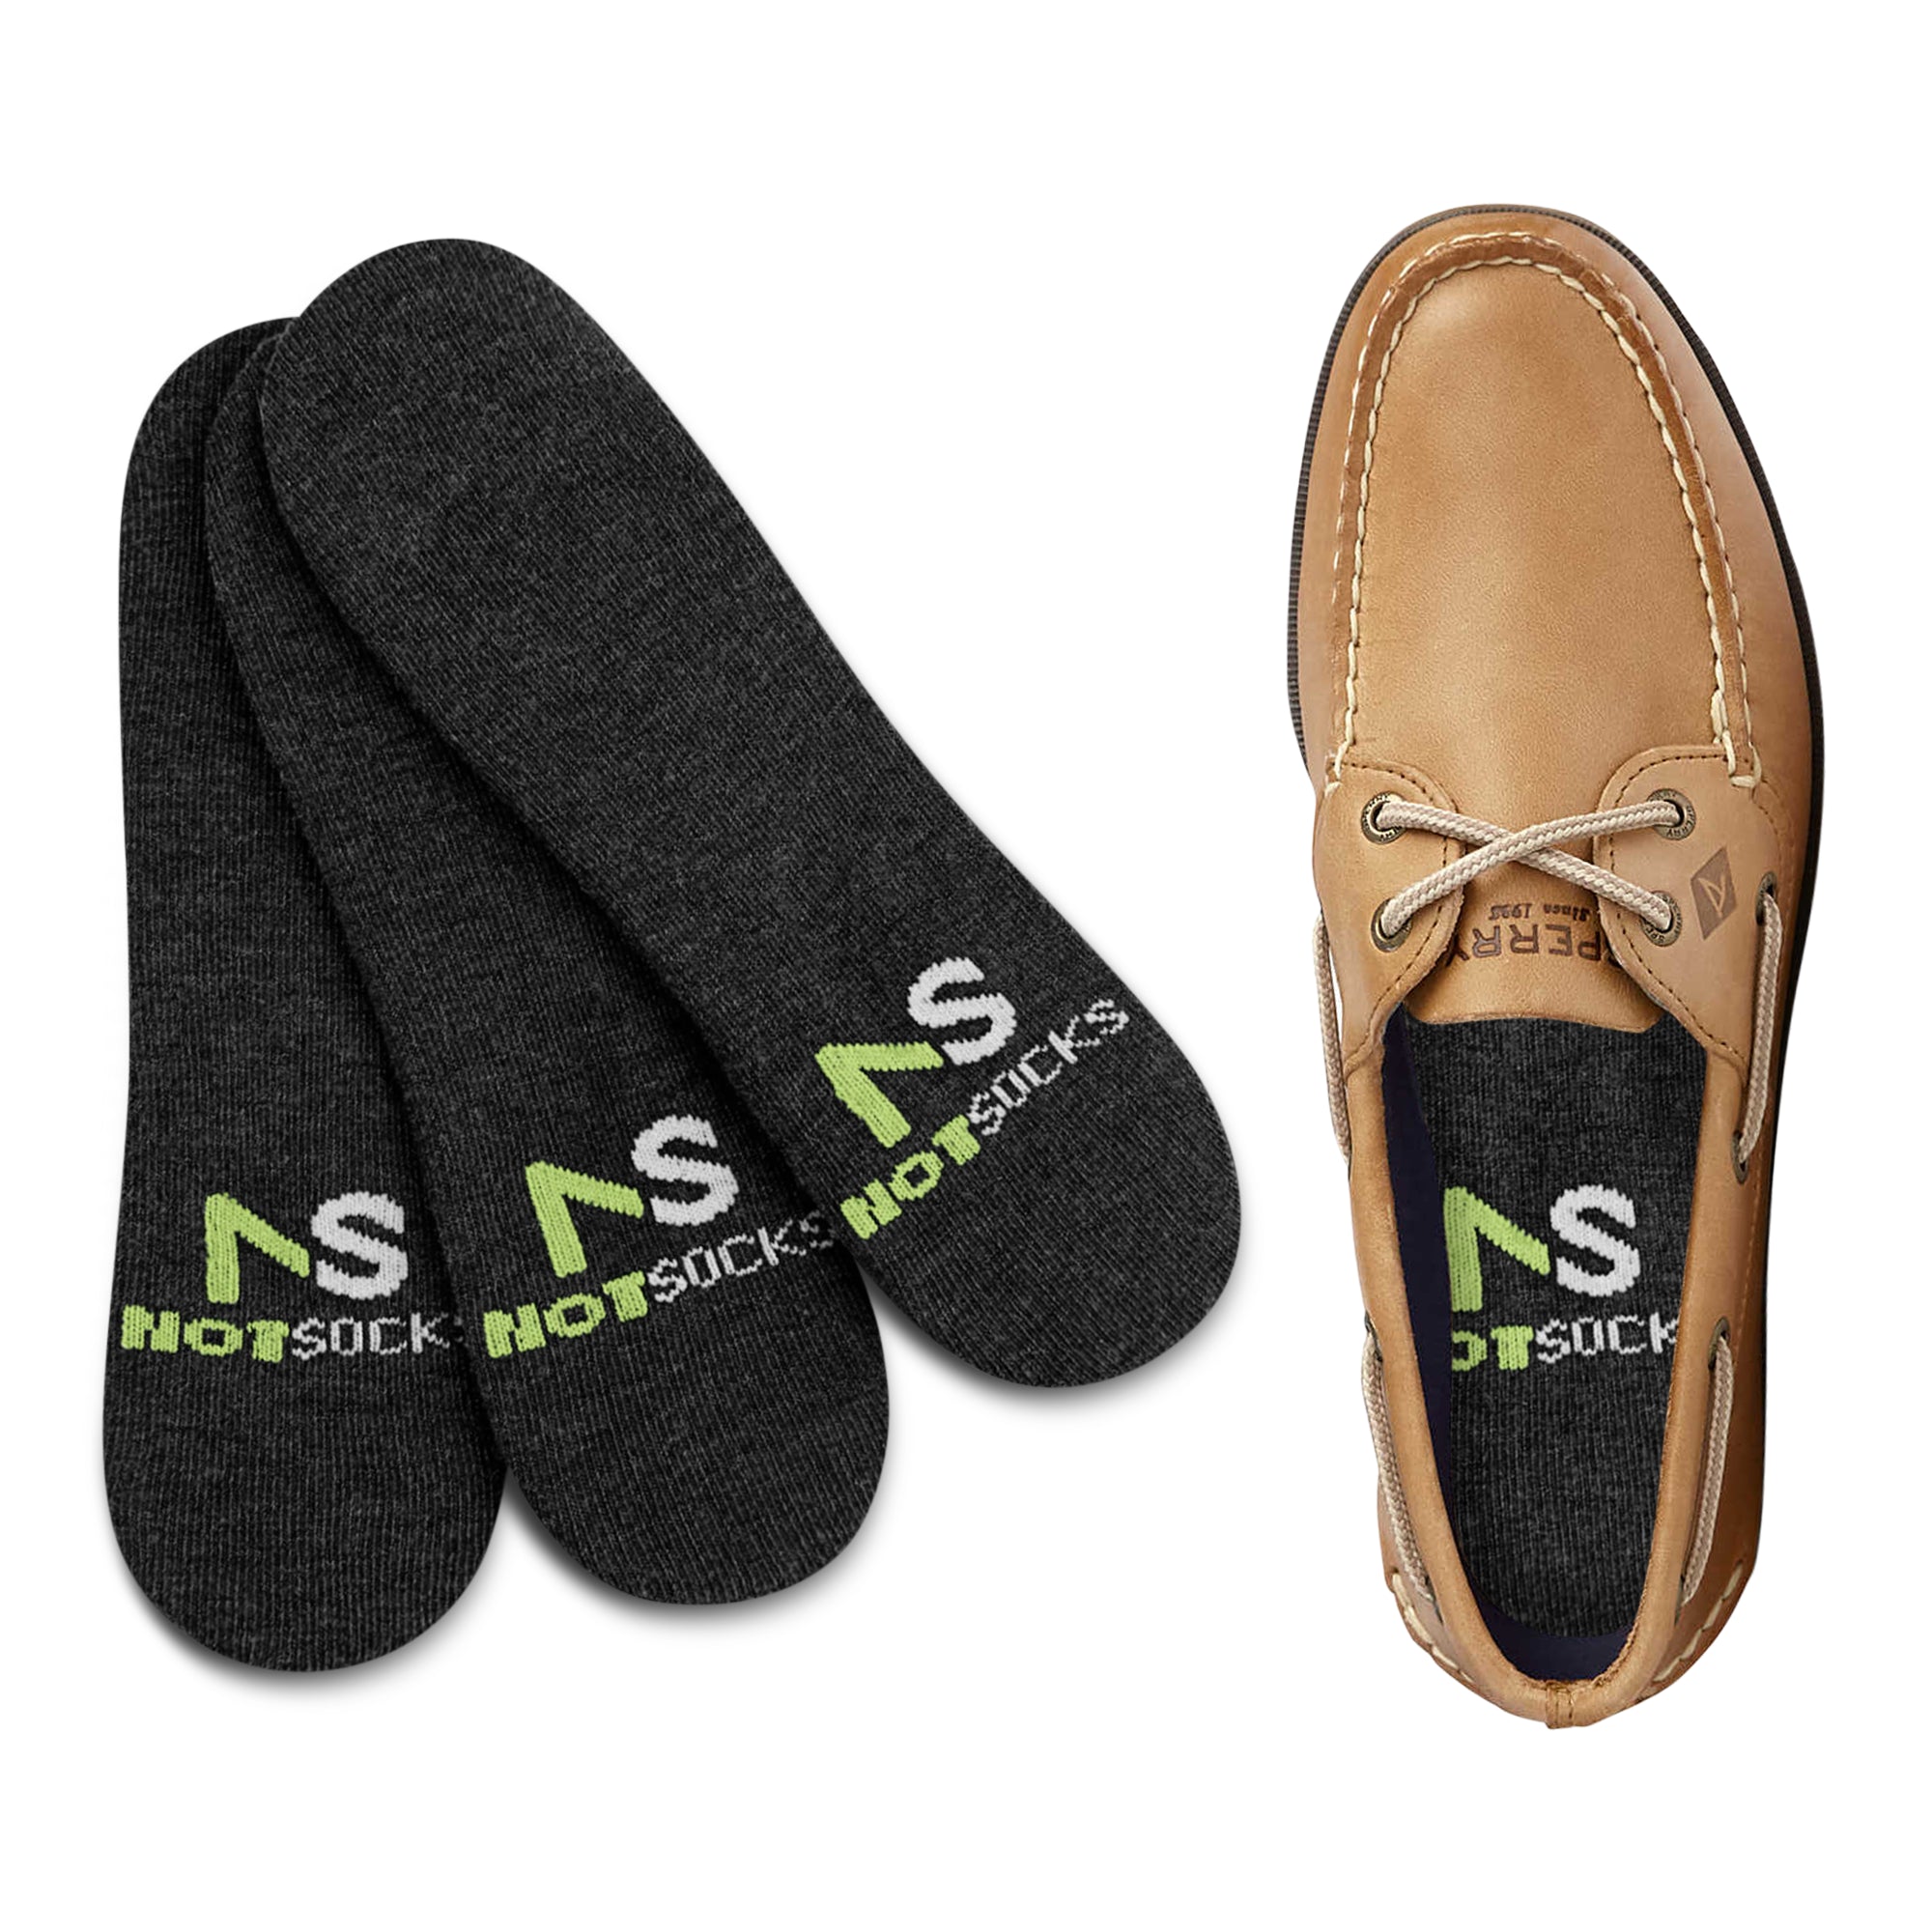 Embrace Summer Comfort with NotSocks: The Ultimate Sockless Solution